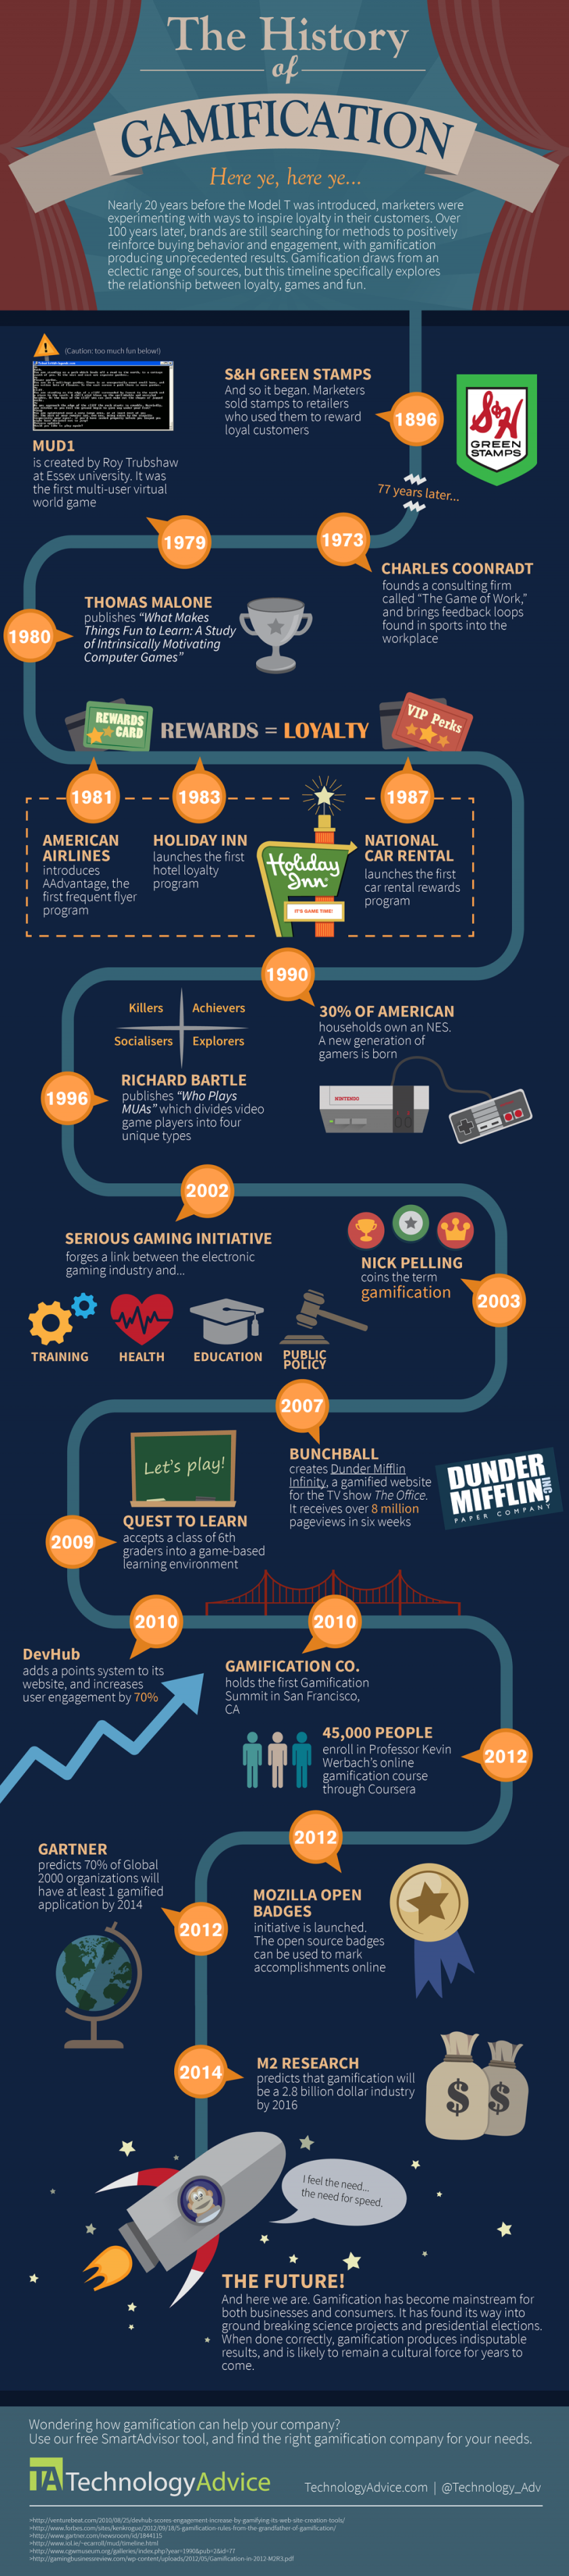 a-brief-history-of-gamification-infographic-1000x4526